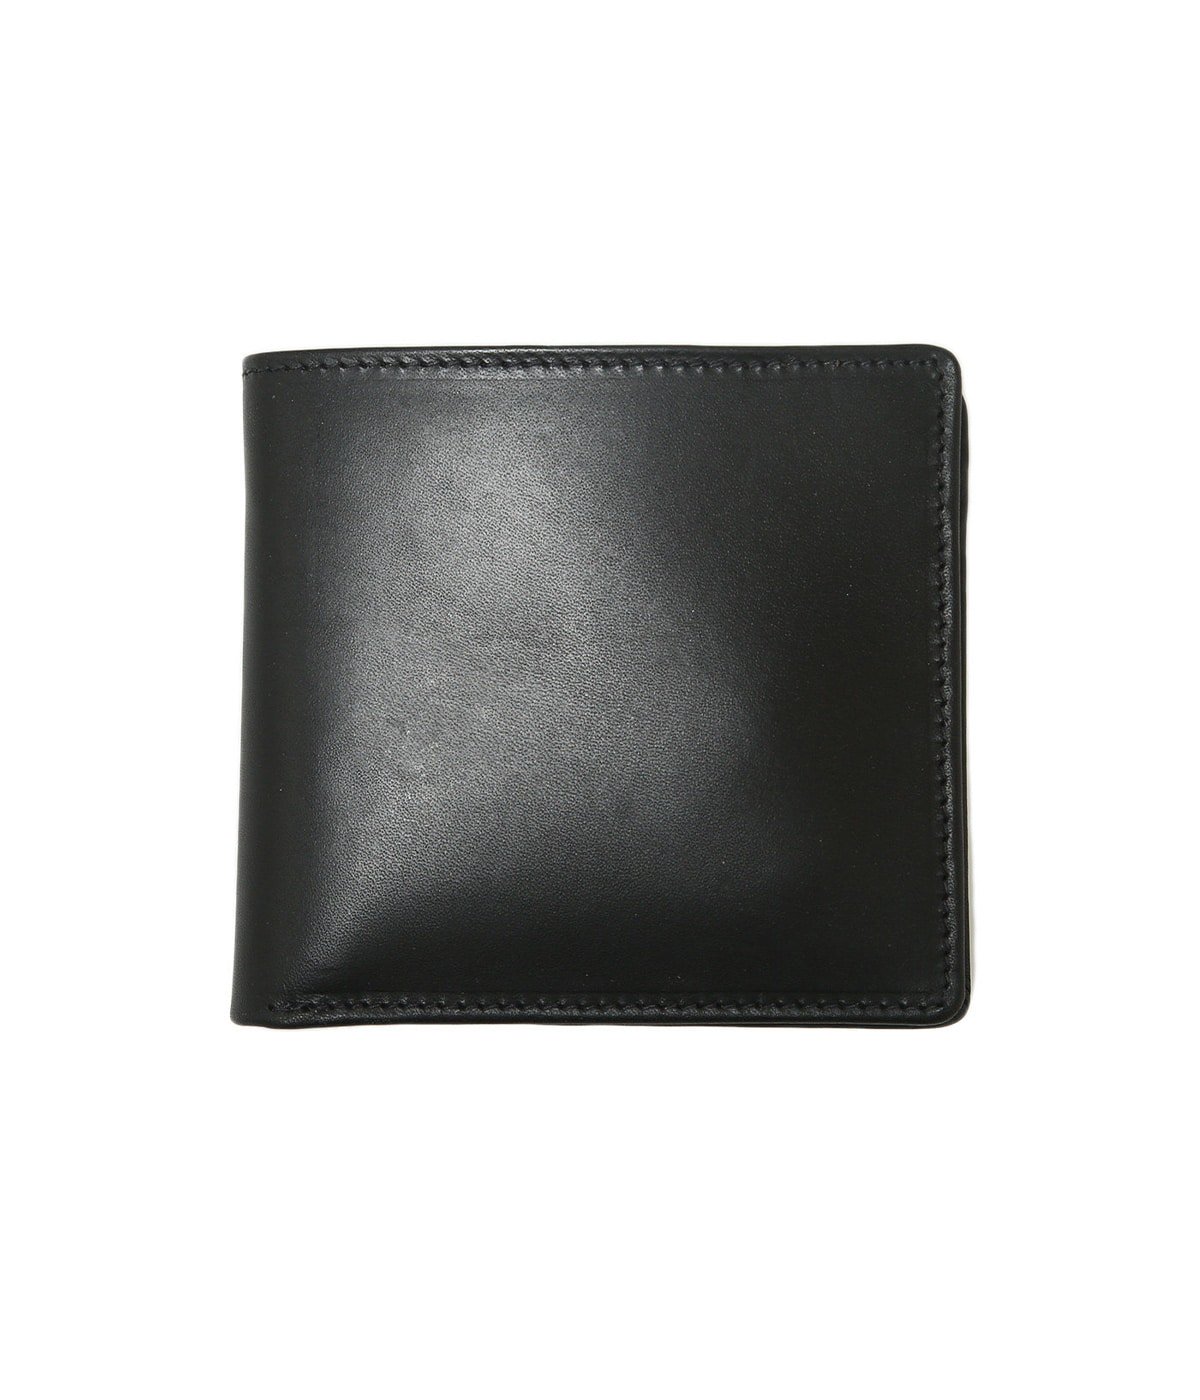 NOTECASE WITH COIN CASE DERBY COLLECTION